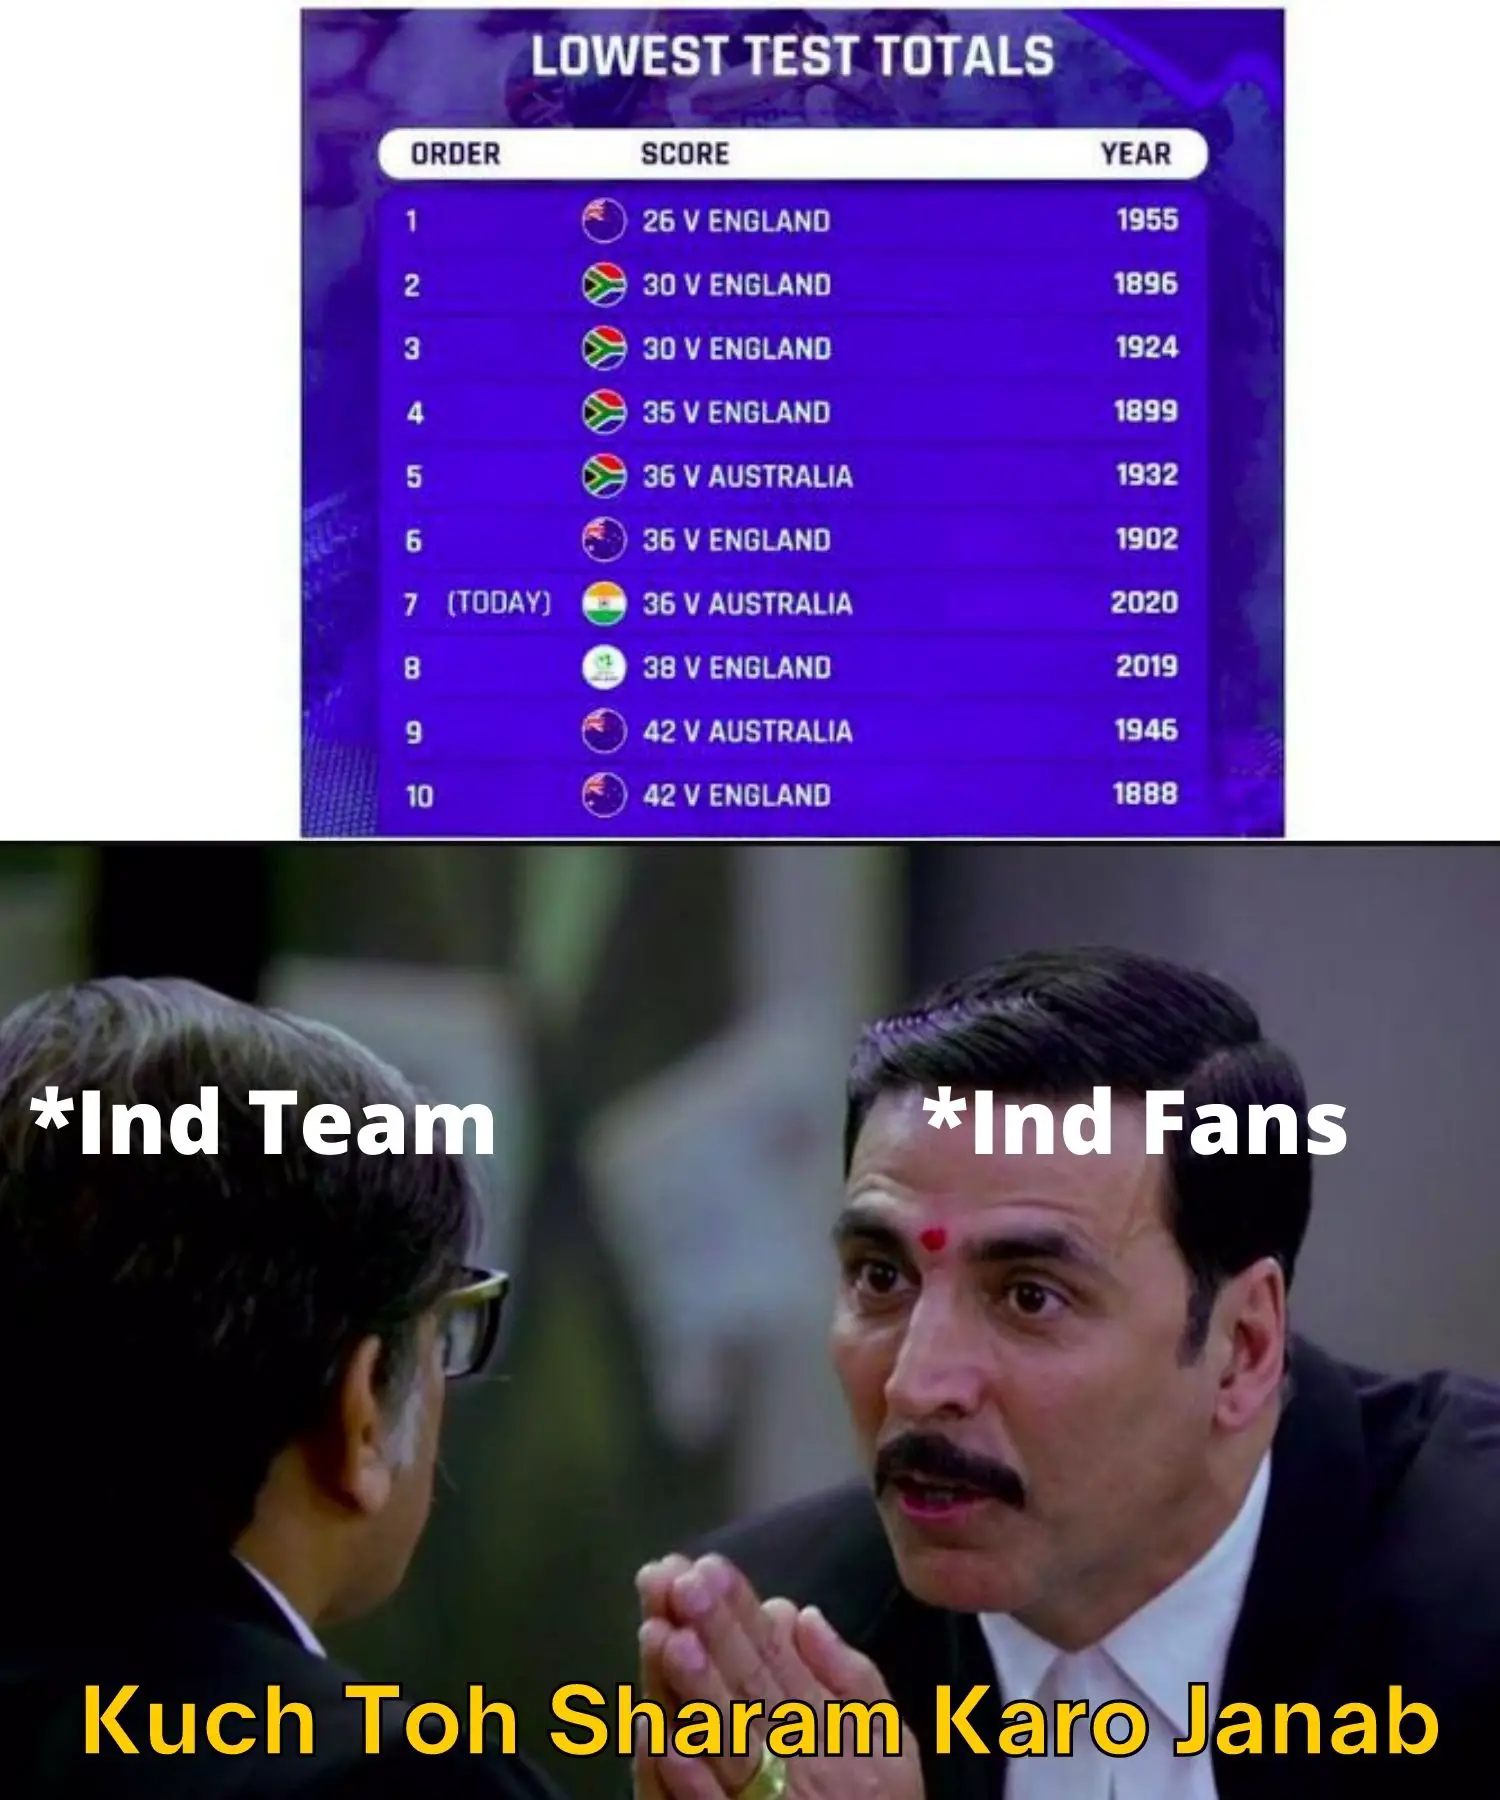 India 36 All Out Meme Ft Lowest Test Match Score